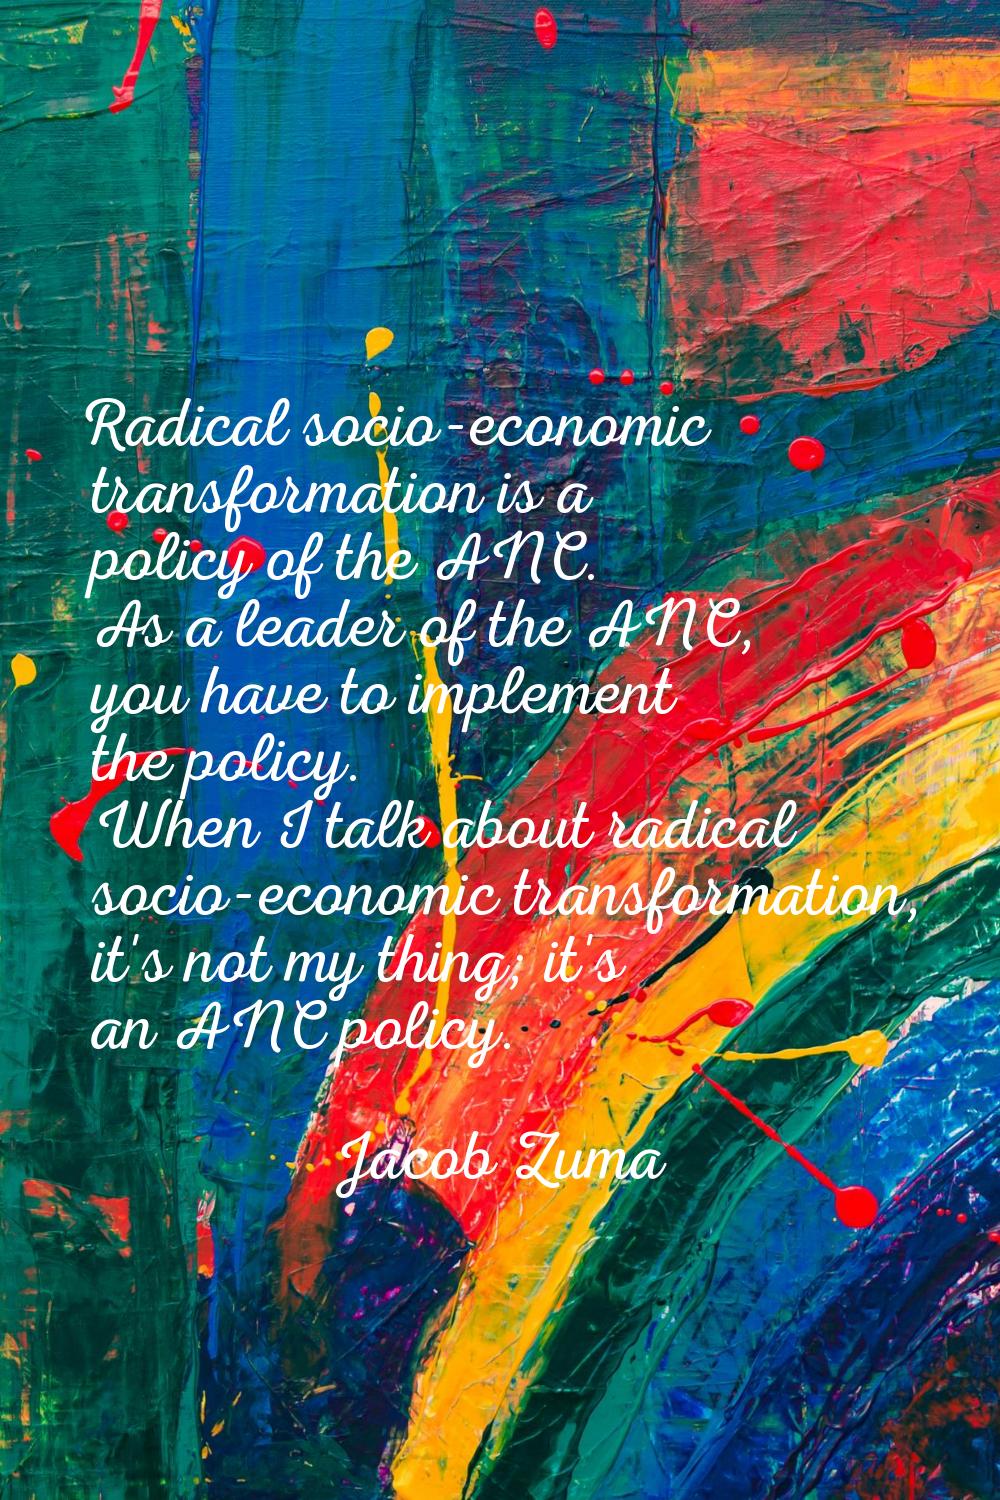 Radical socio-economic transformation is a policy of the ANC. As a leader of the ANC, you have to i